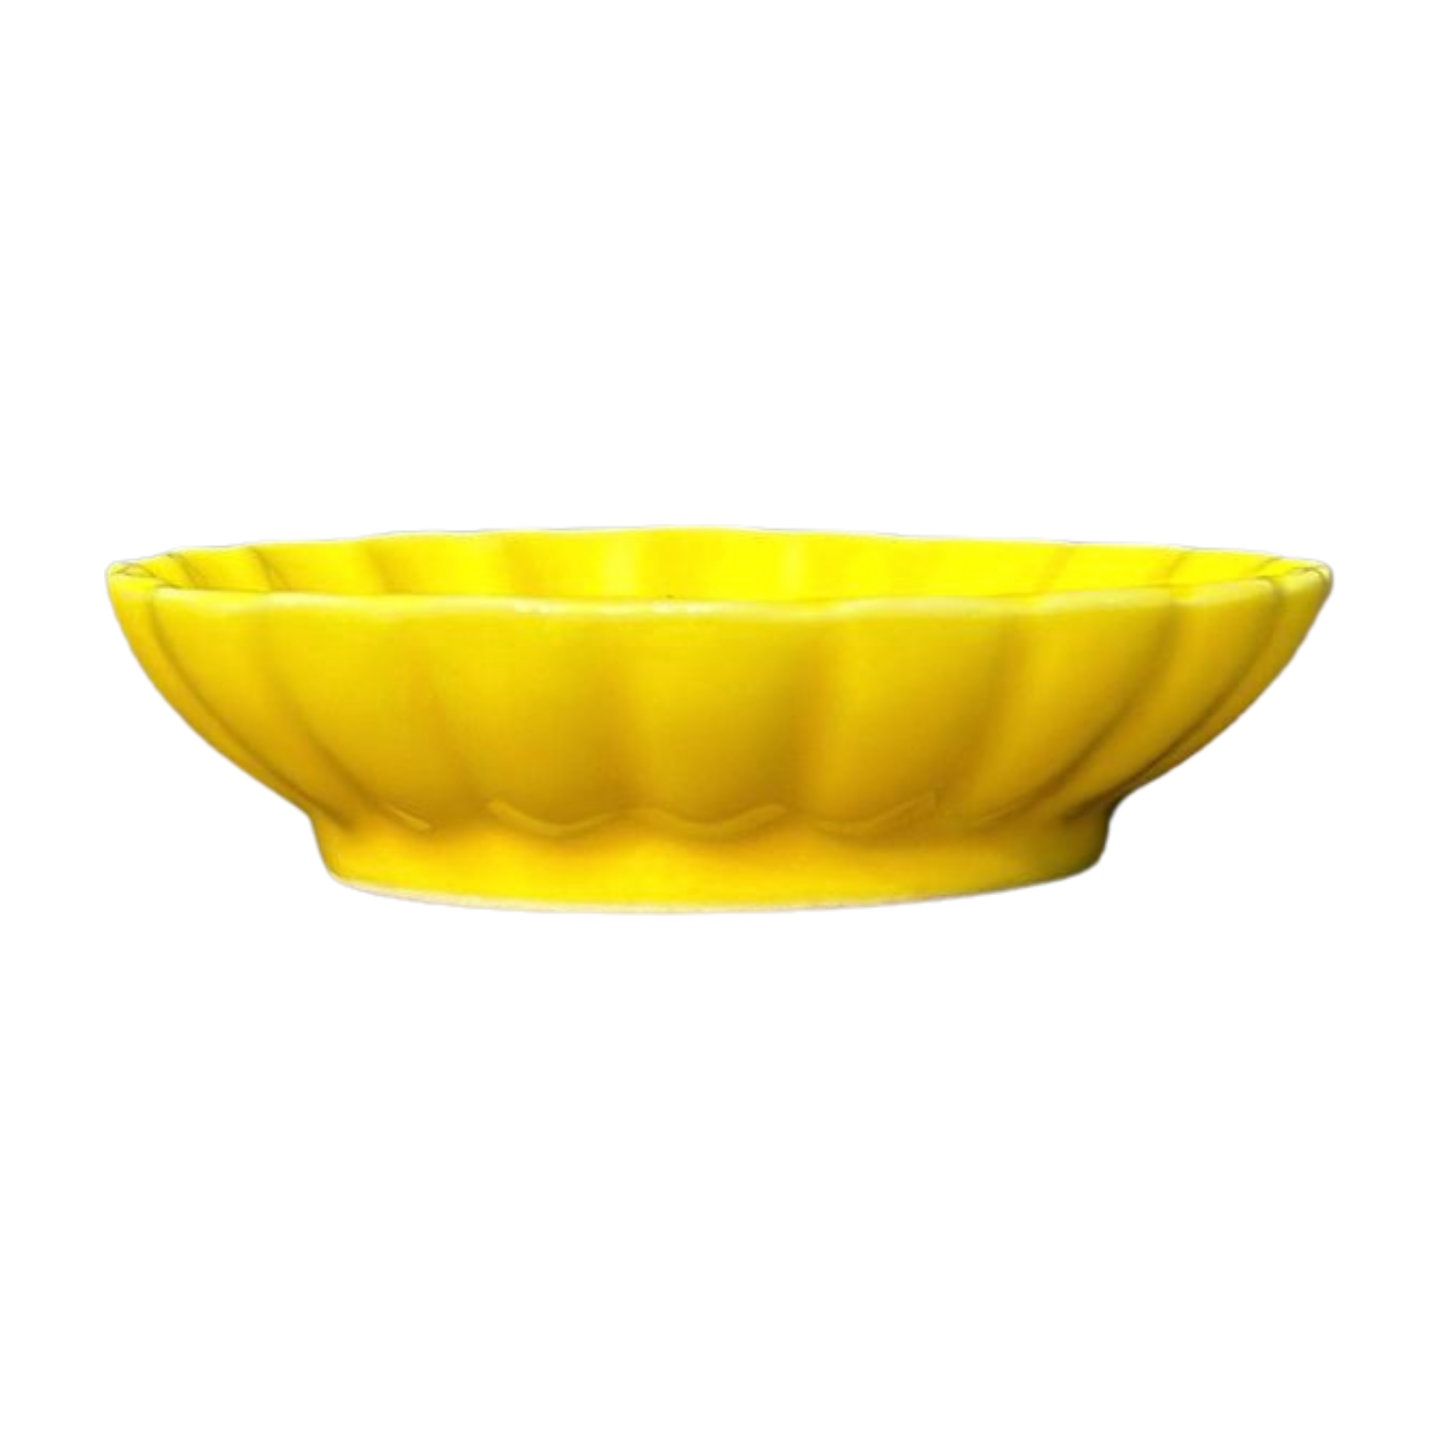 Japanese Sauce Plate in Yellow